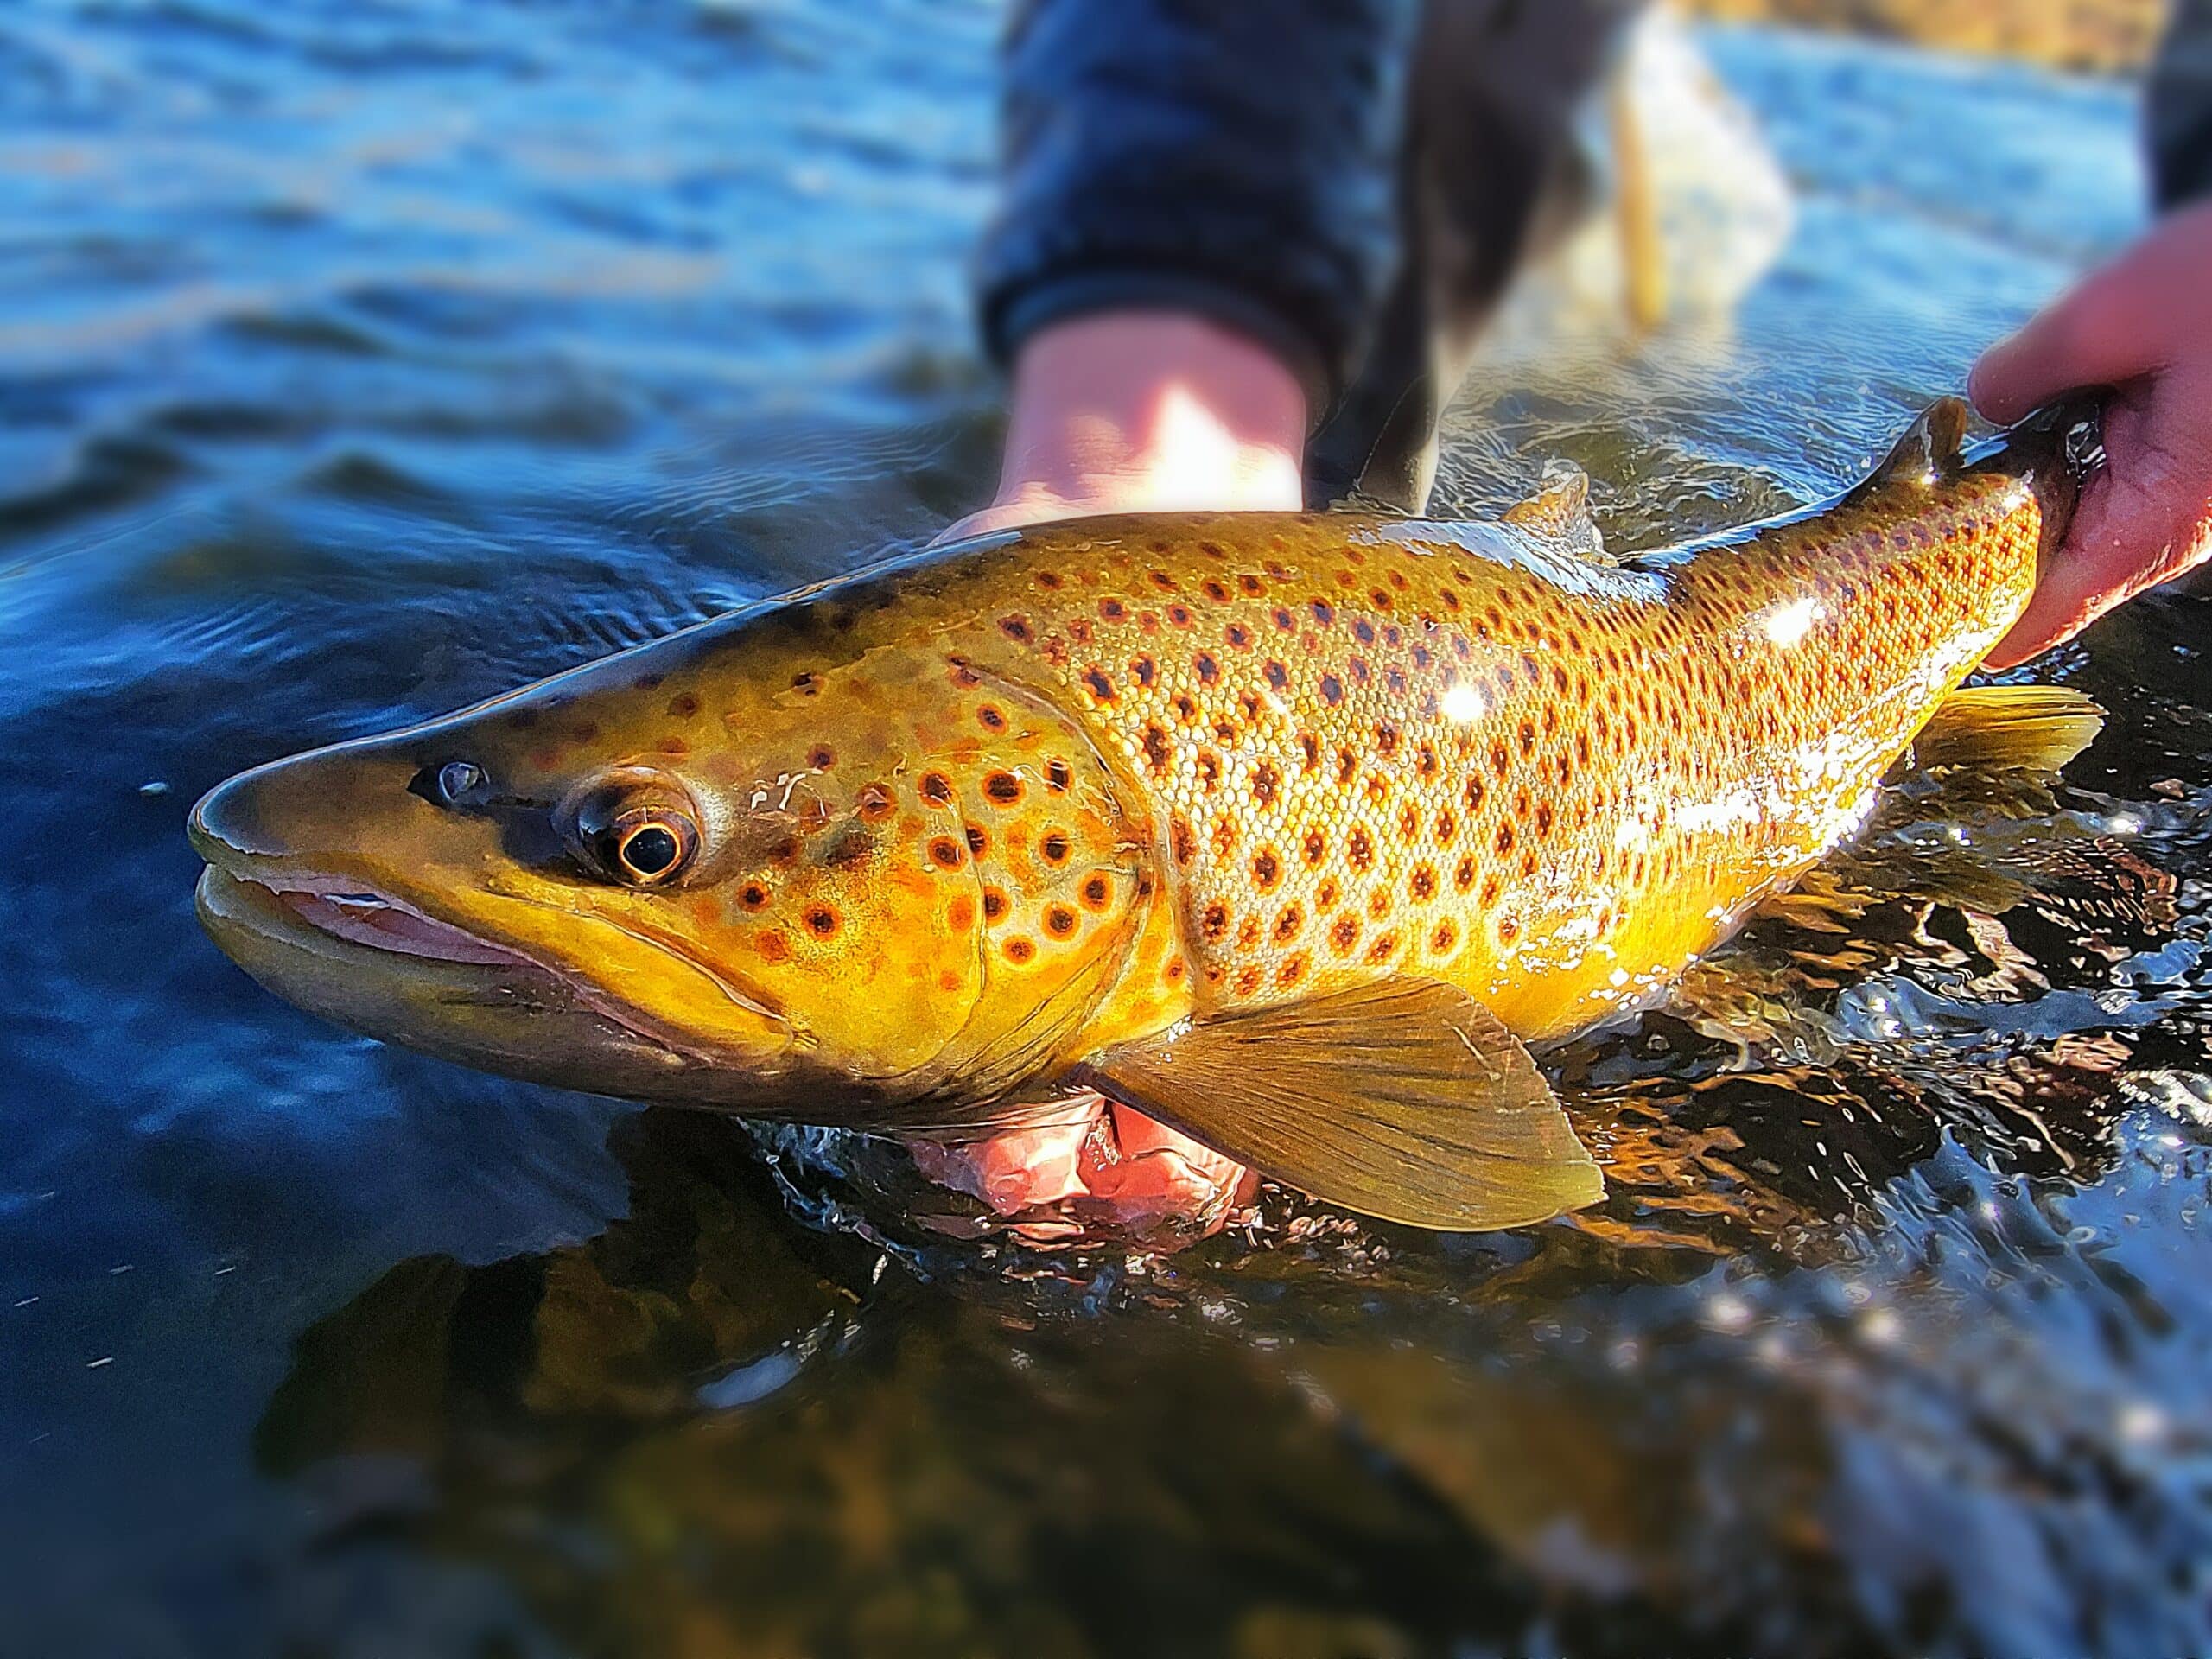 Truckee River Fly Fishing Report- November 21st